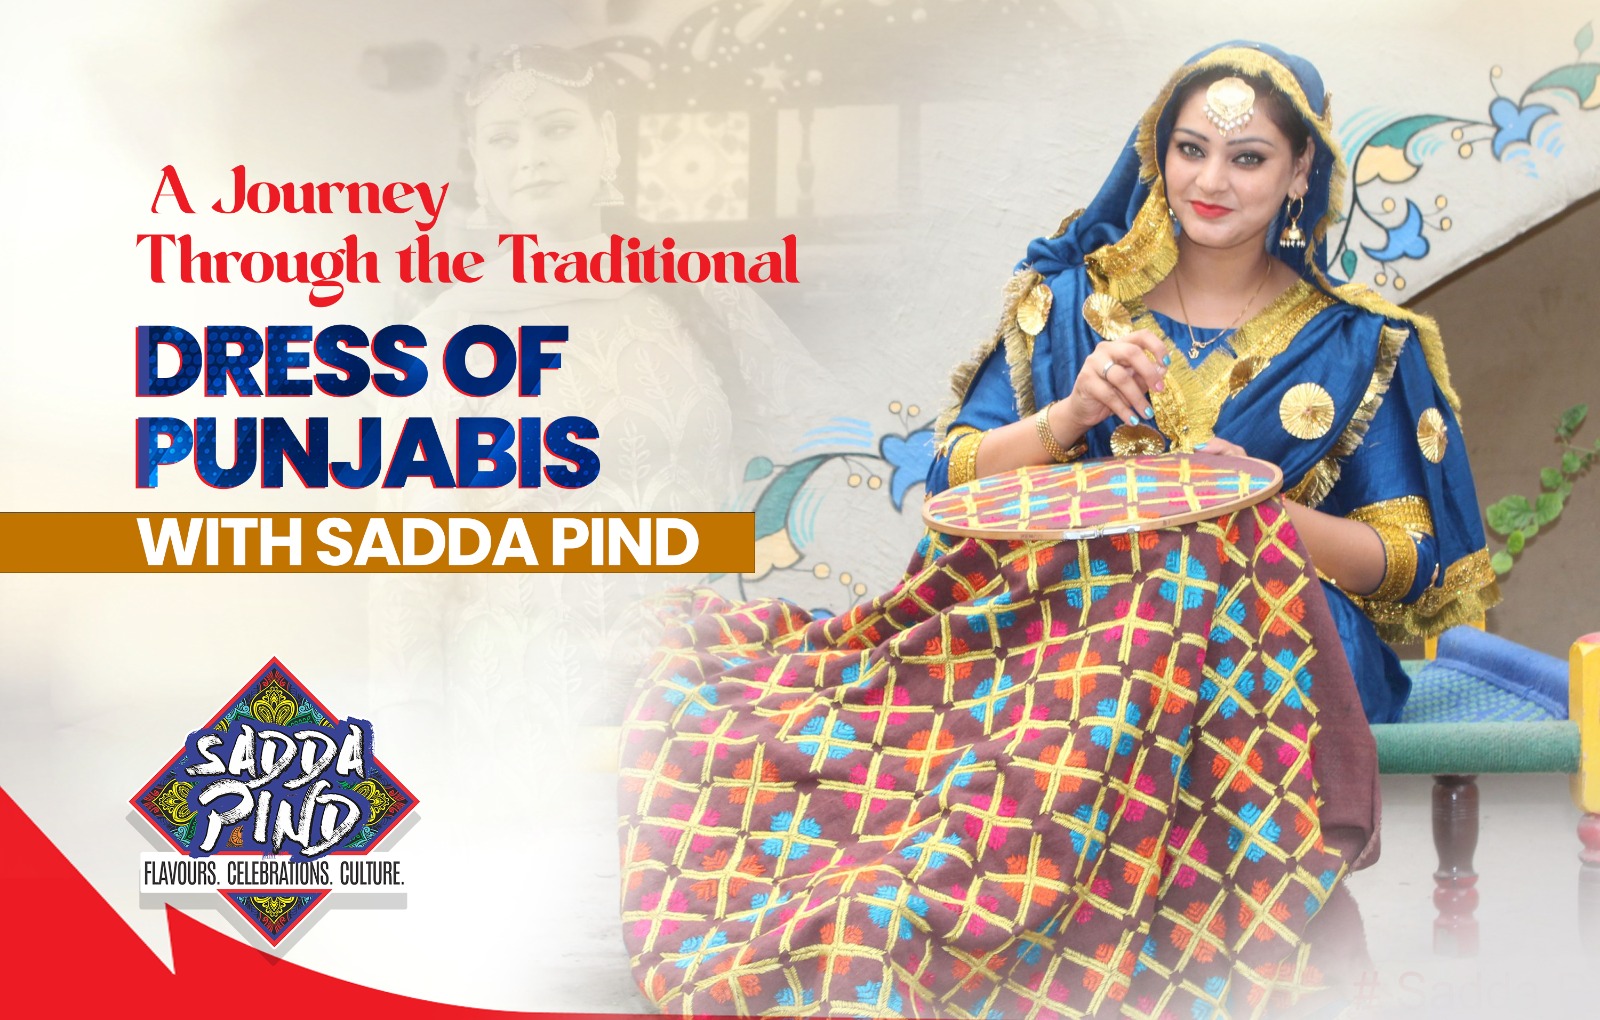 A Journey Through the Traditional Dress of Punjabis with Sadda Pind